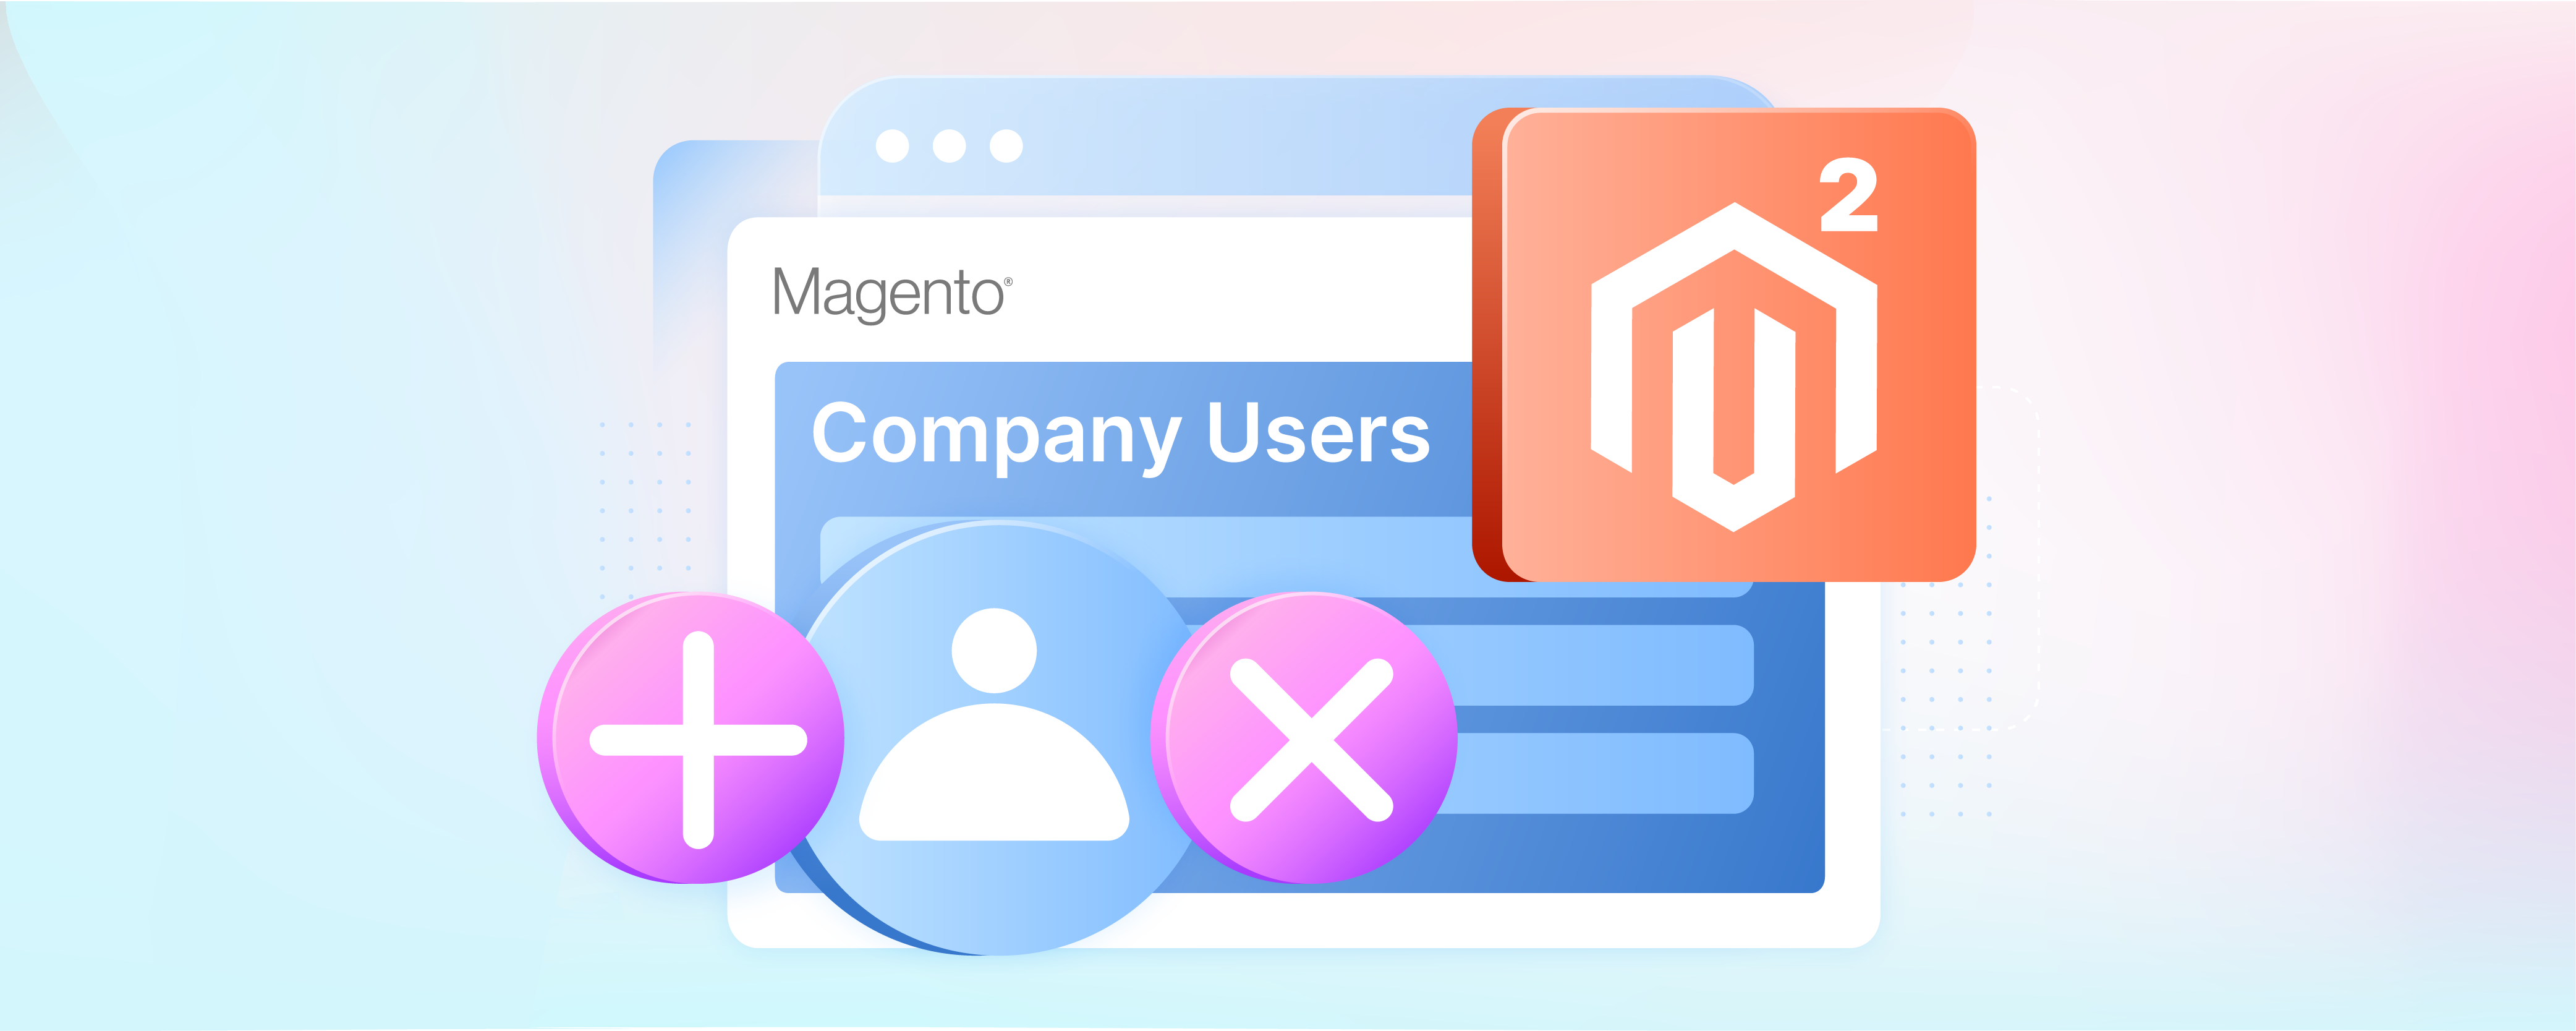 How To Add and Remove Magento 2 Company Users’ Account?